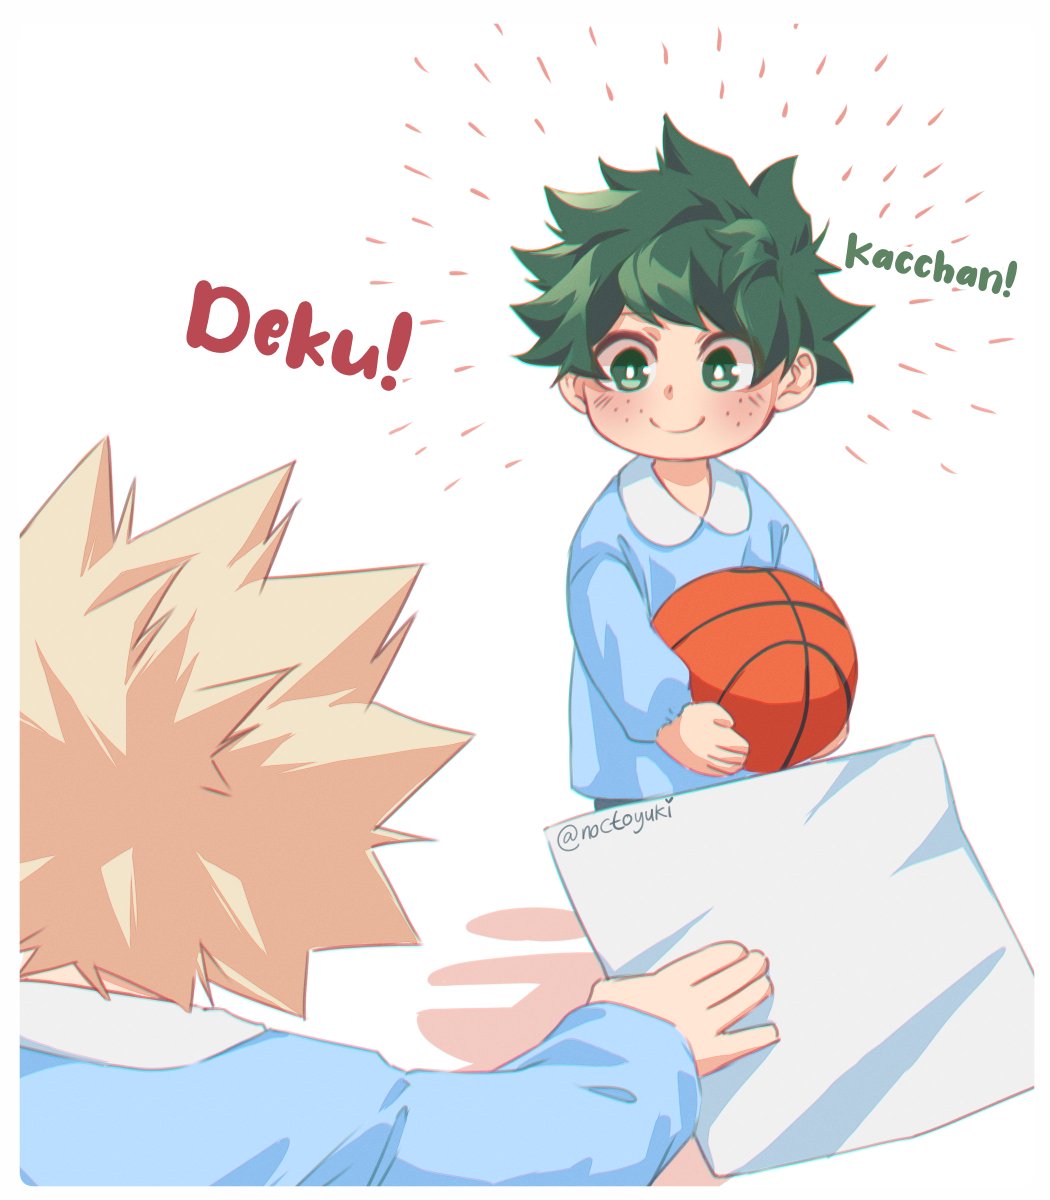 IT'S TOMORROW!! (at least for me) 😳IZUKU'S DAY!
This is the last countdown art, featuring the smol bkdk and Aizawa.

Aizawa: *looks at Kacchan's writing* "Do you need help?"
Kacchan: "I got this!" 